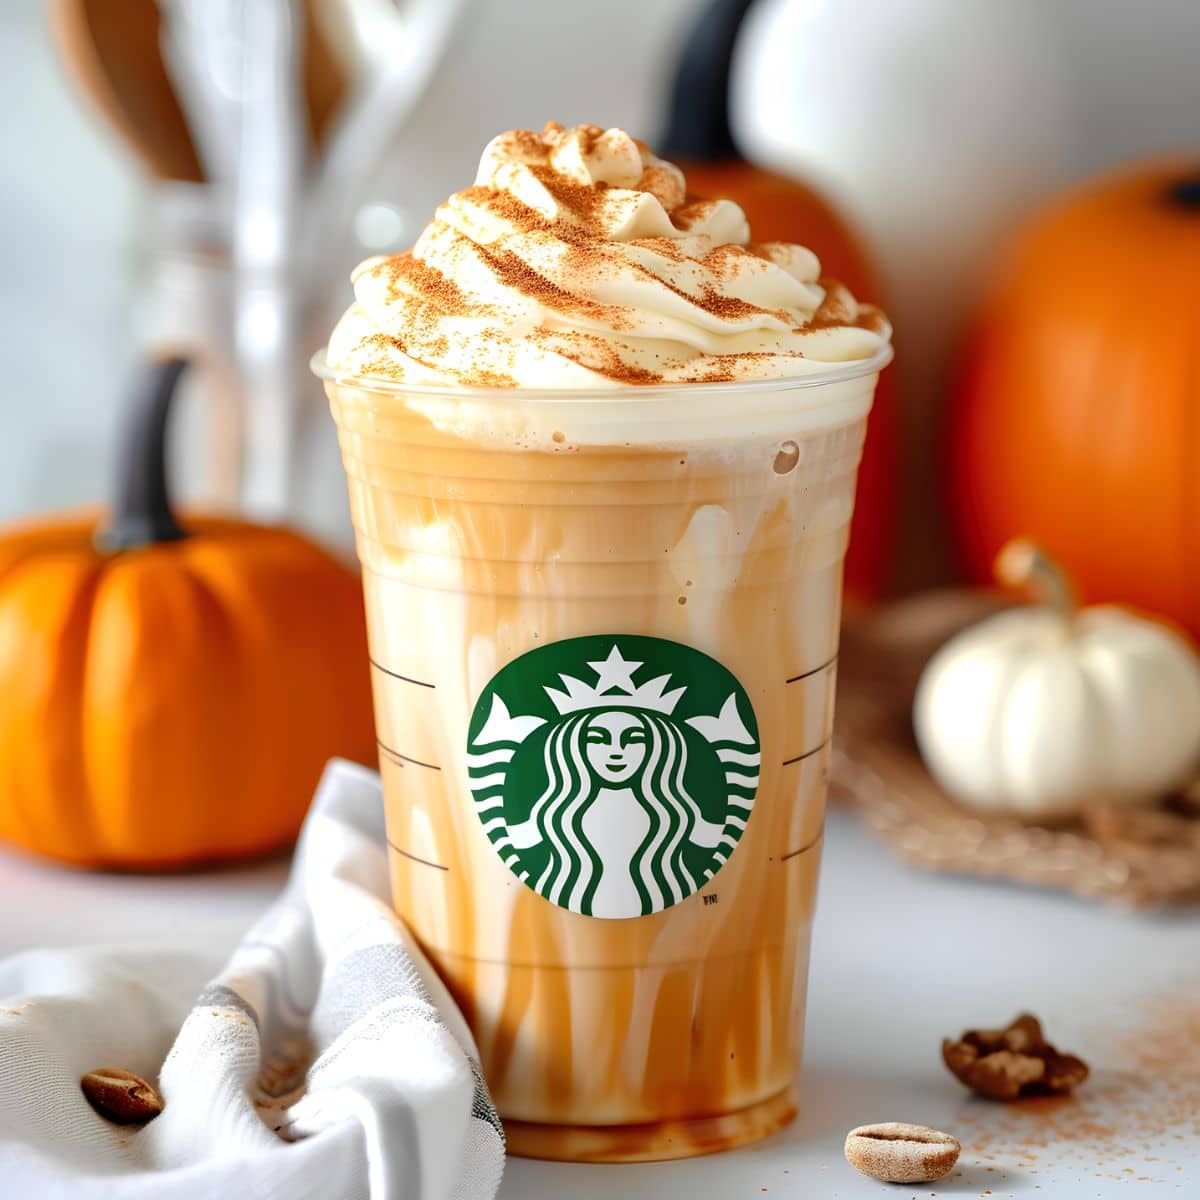 Homemade aromatic and flavorful pumpkin spice latte in a glass